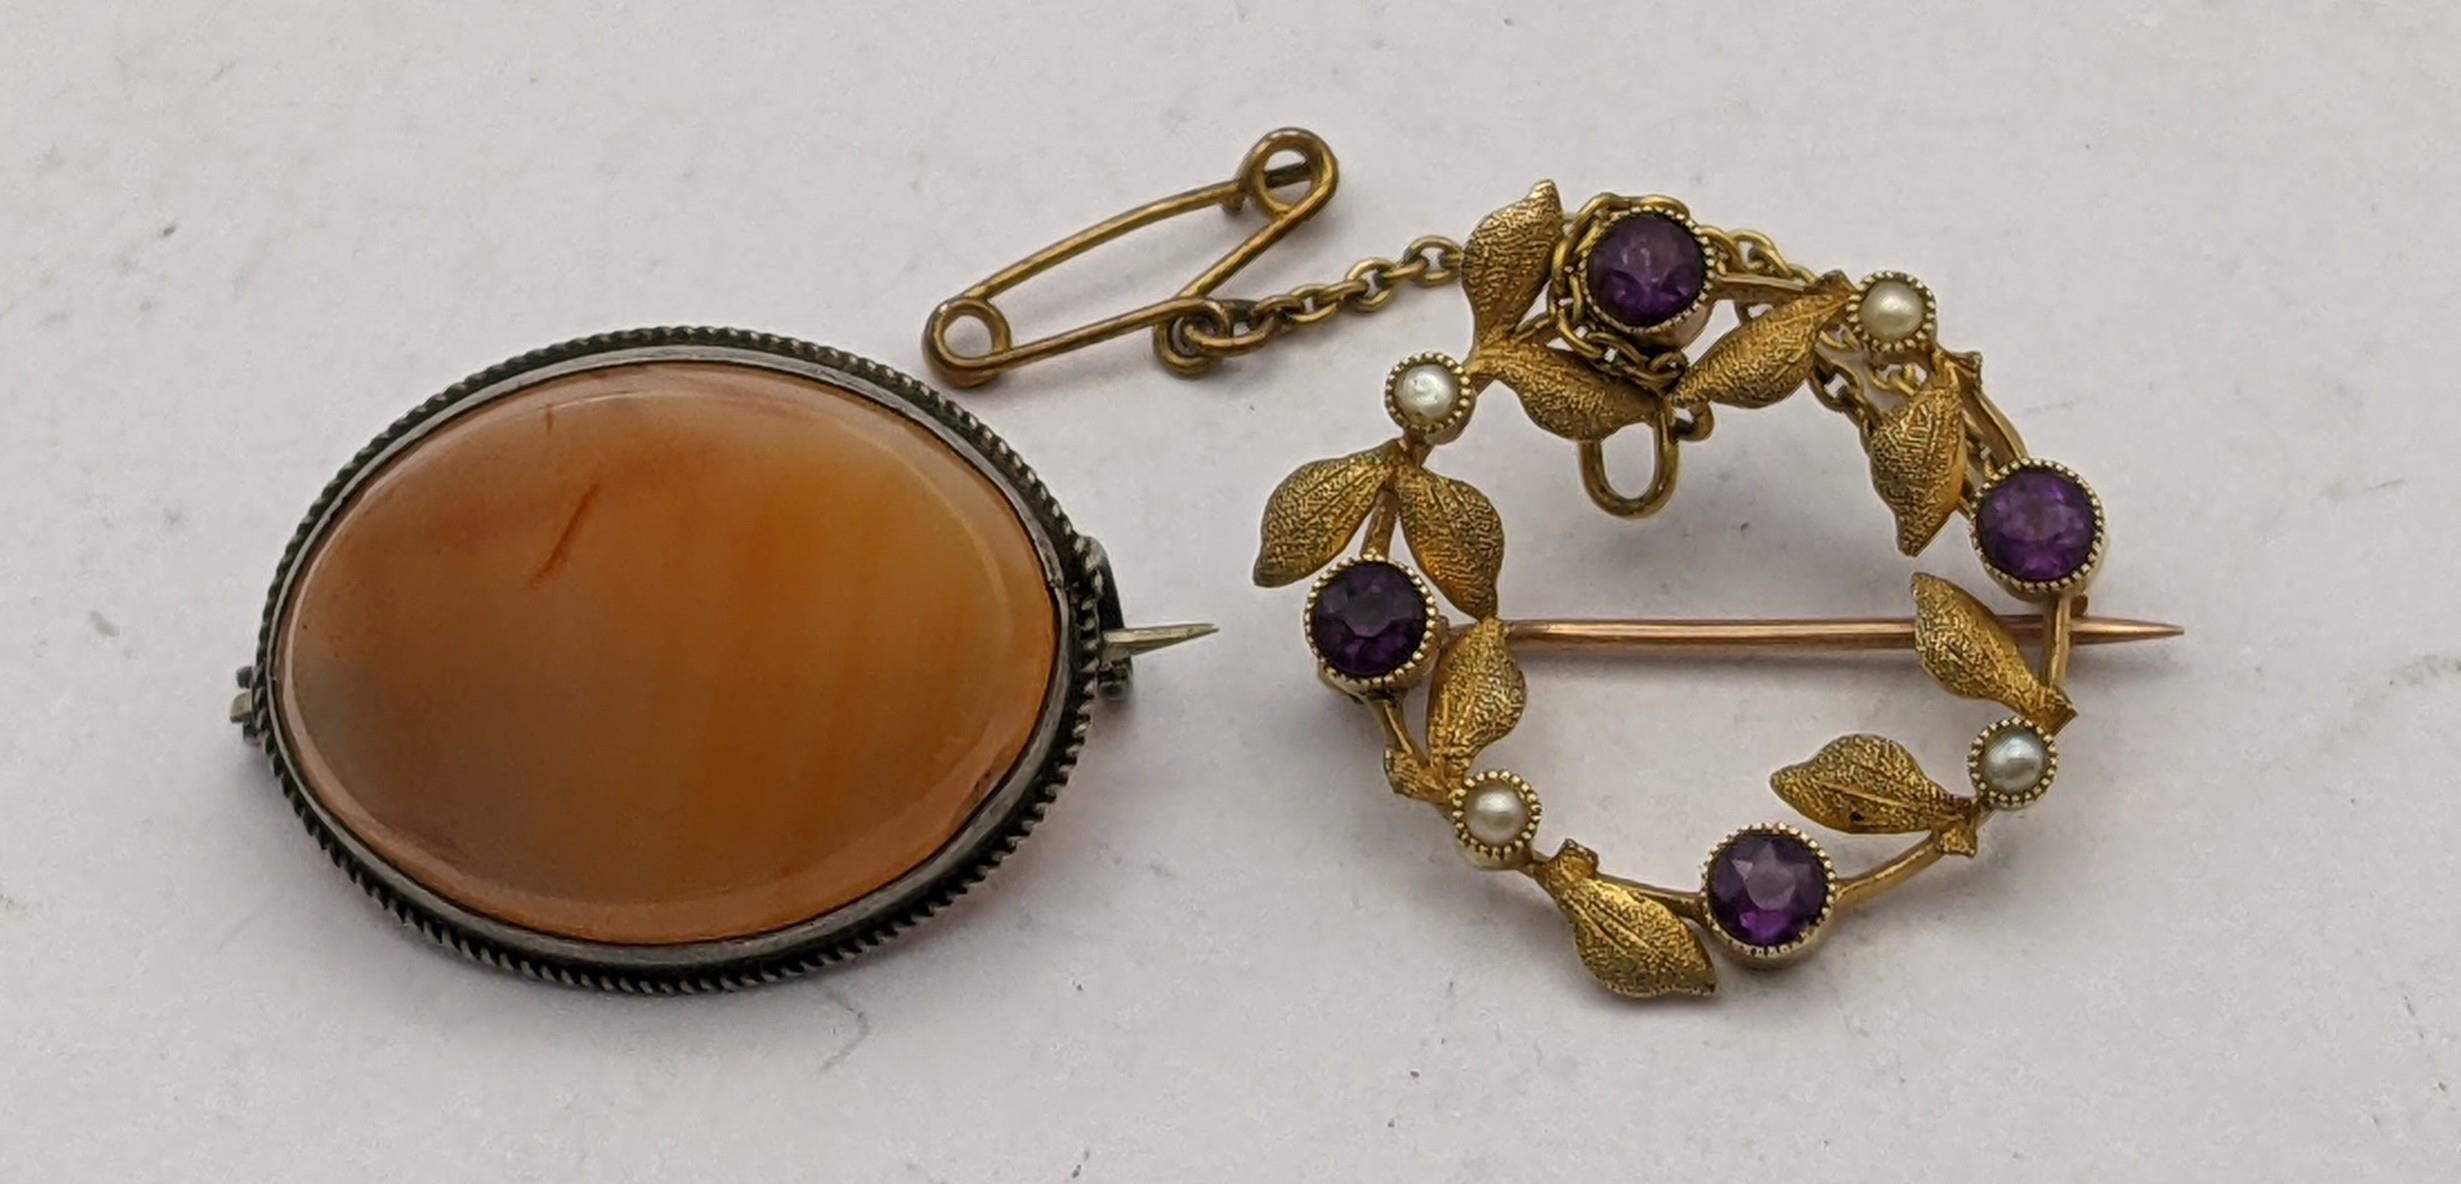 An Edwardian yellow metal brooch inset with amethyst and seed pearls 2.7g together with an oval